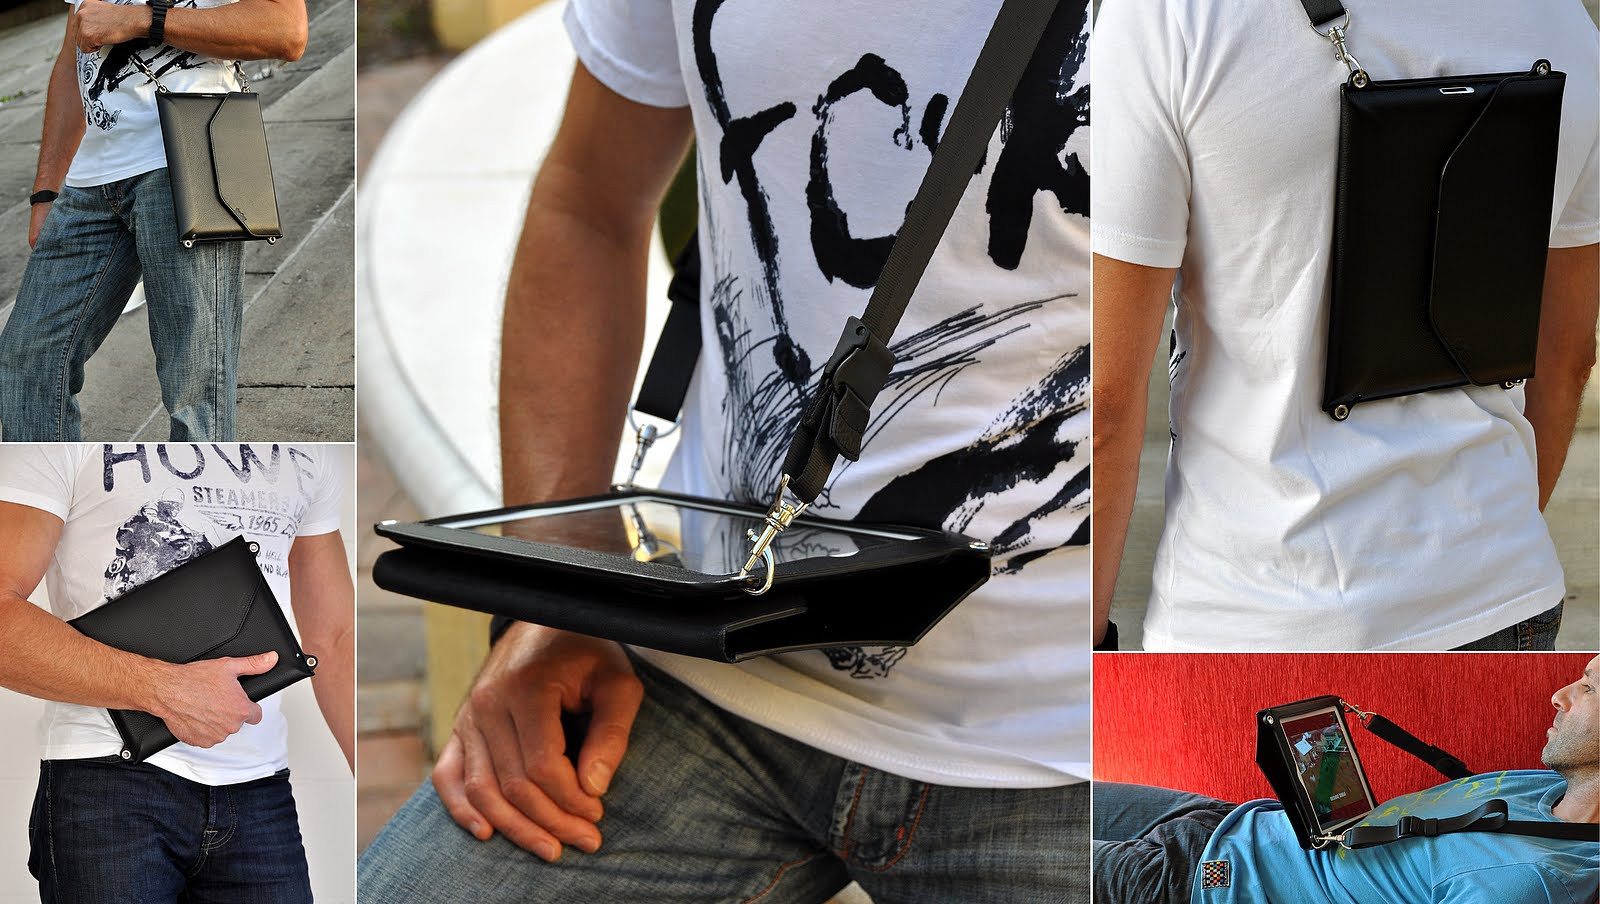 Across the hands-free iPad case in action: as a cross-body bag, portfolio,mobile desk, backpack